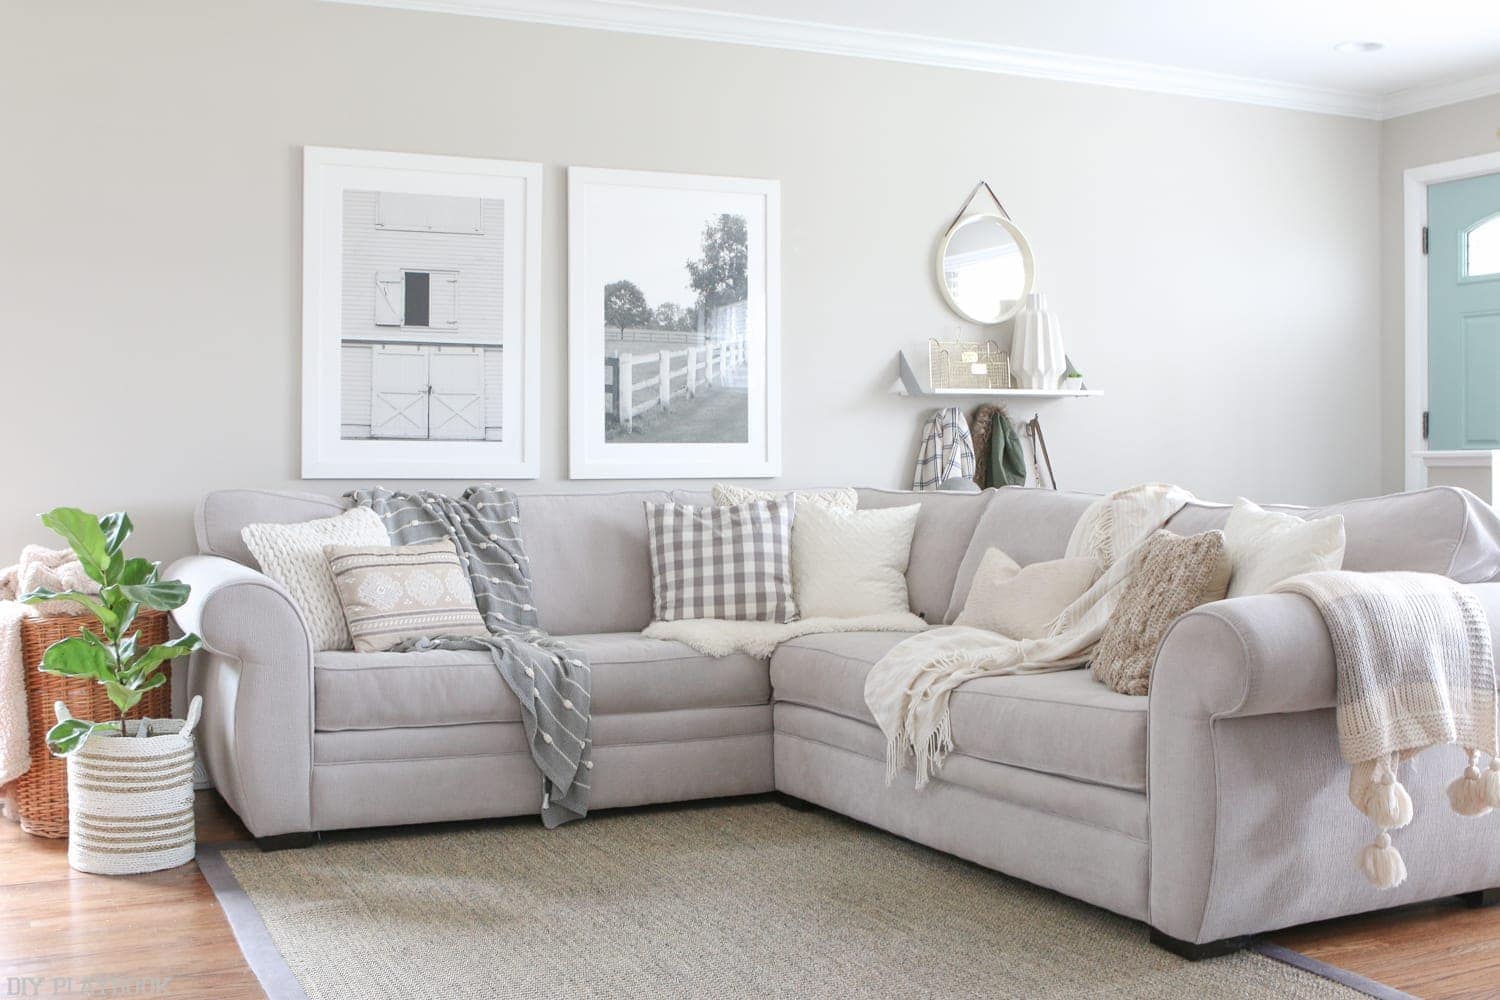 This minimalist style living room is the perfect balance of whites and grays. 